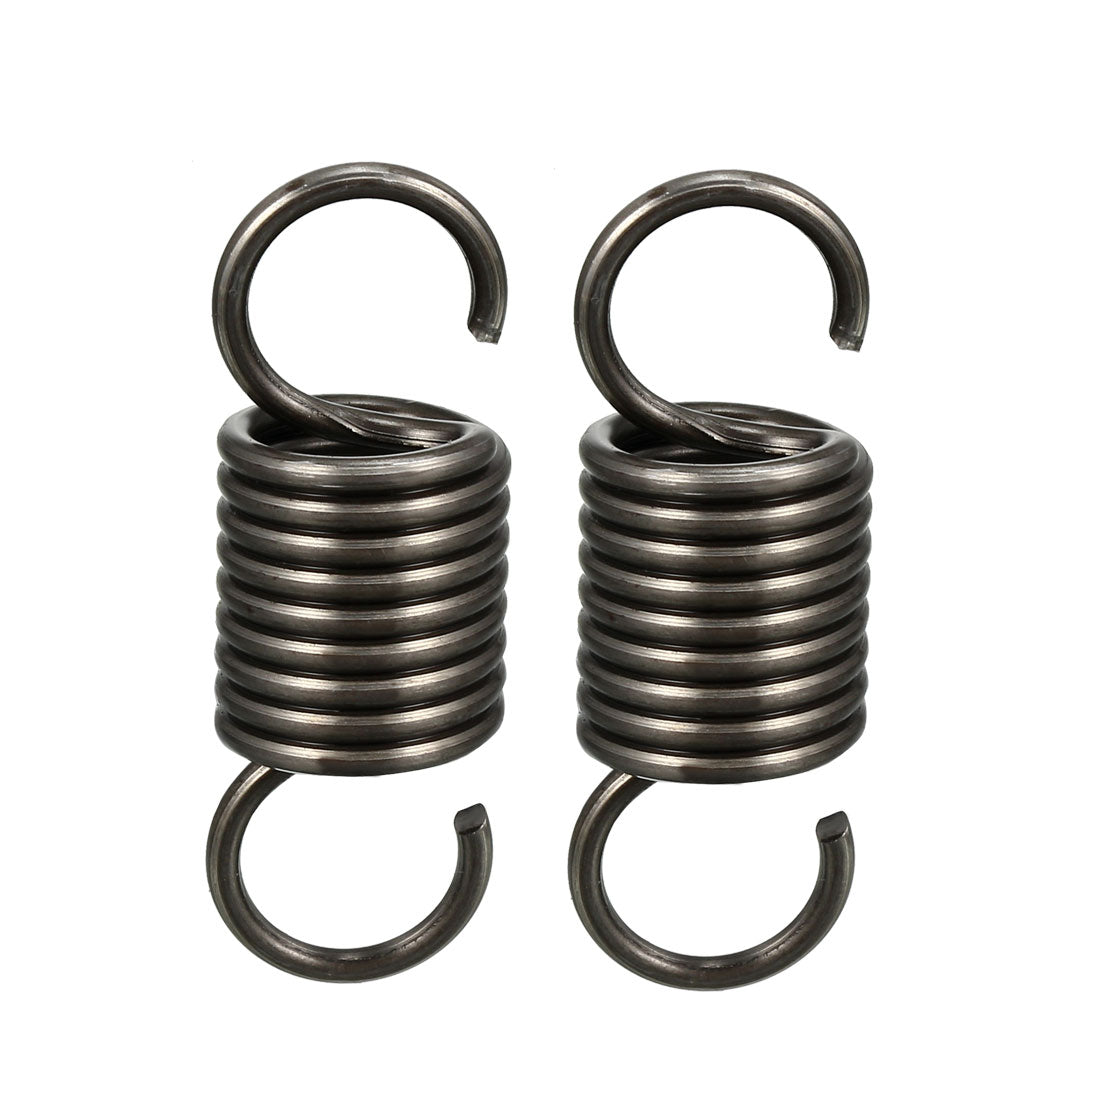 Uxcell Uxcell Extended Tension Spring Wire Diameter 0.098", OD 0.79", Free Length 2.36" 2pcs